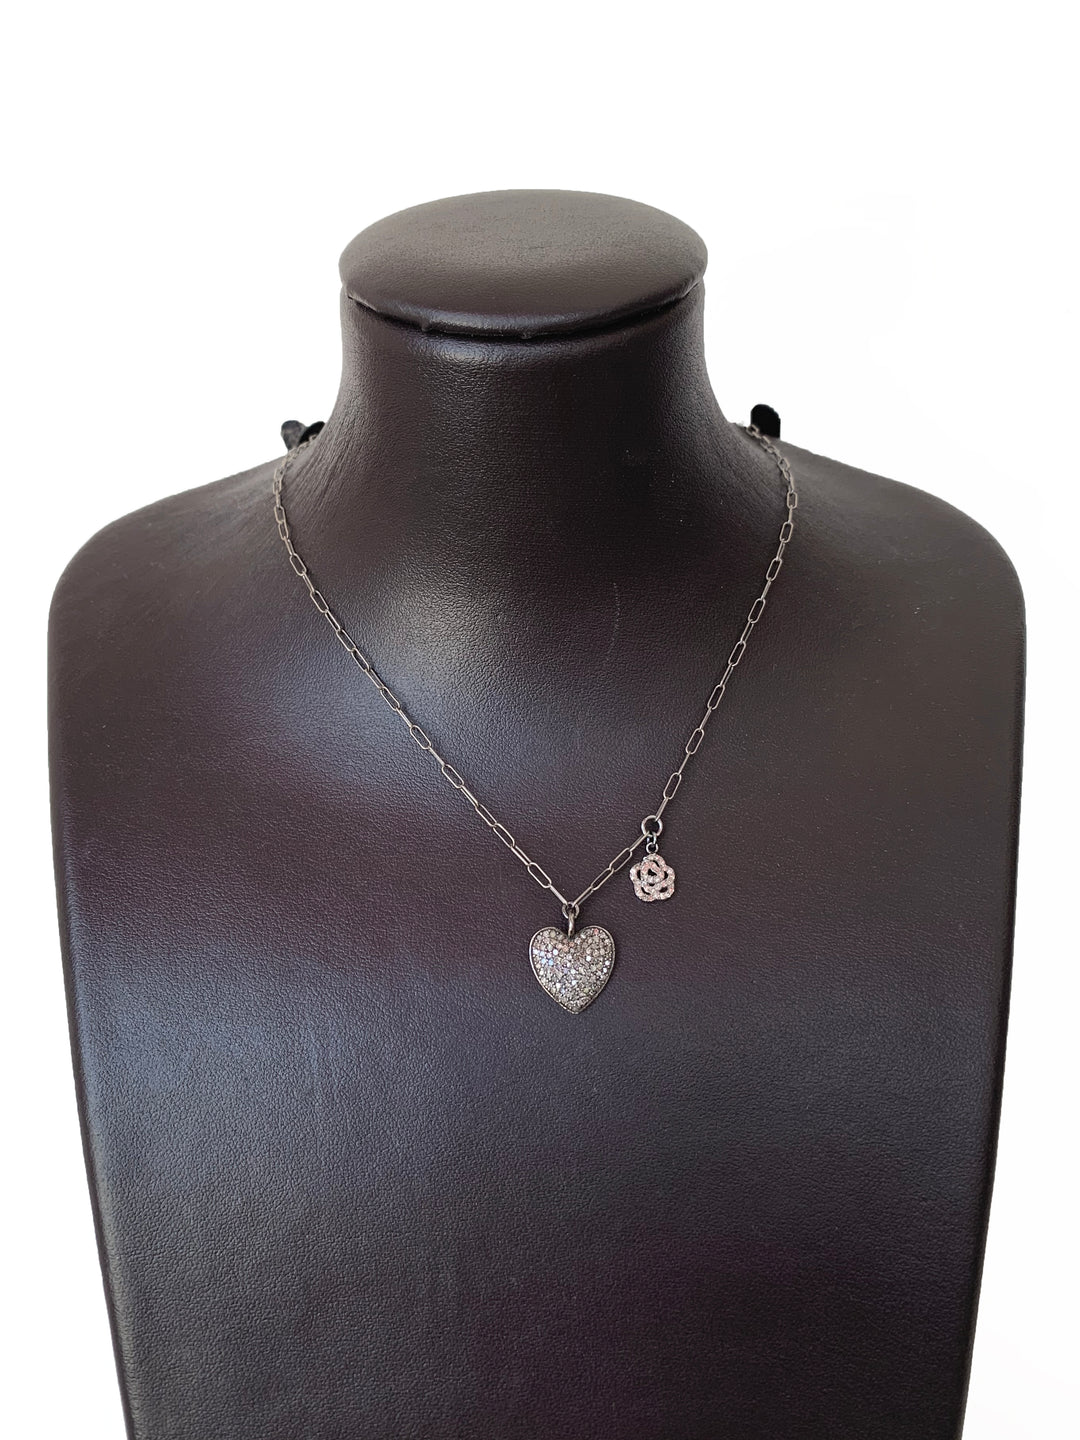 Silver Charm Necklace - Kingfisher Road - Online Boutique